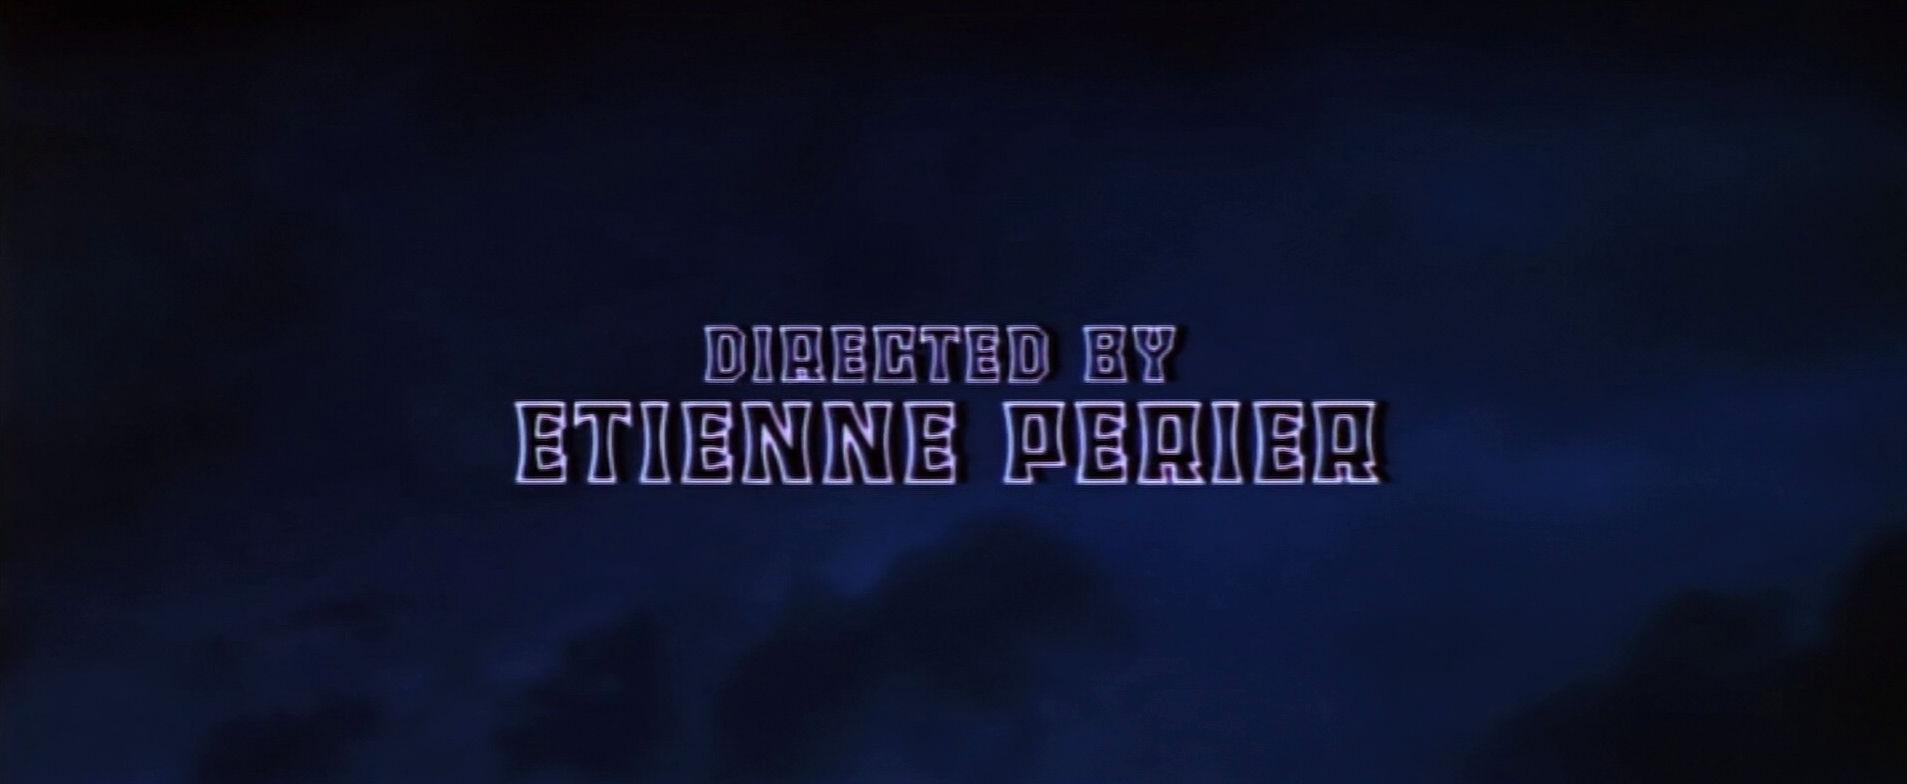 Main title from Zeppelin (1971) (20). Directed by Etienne Perier